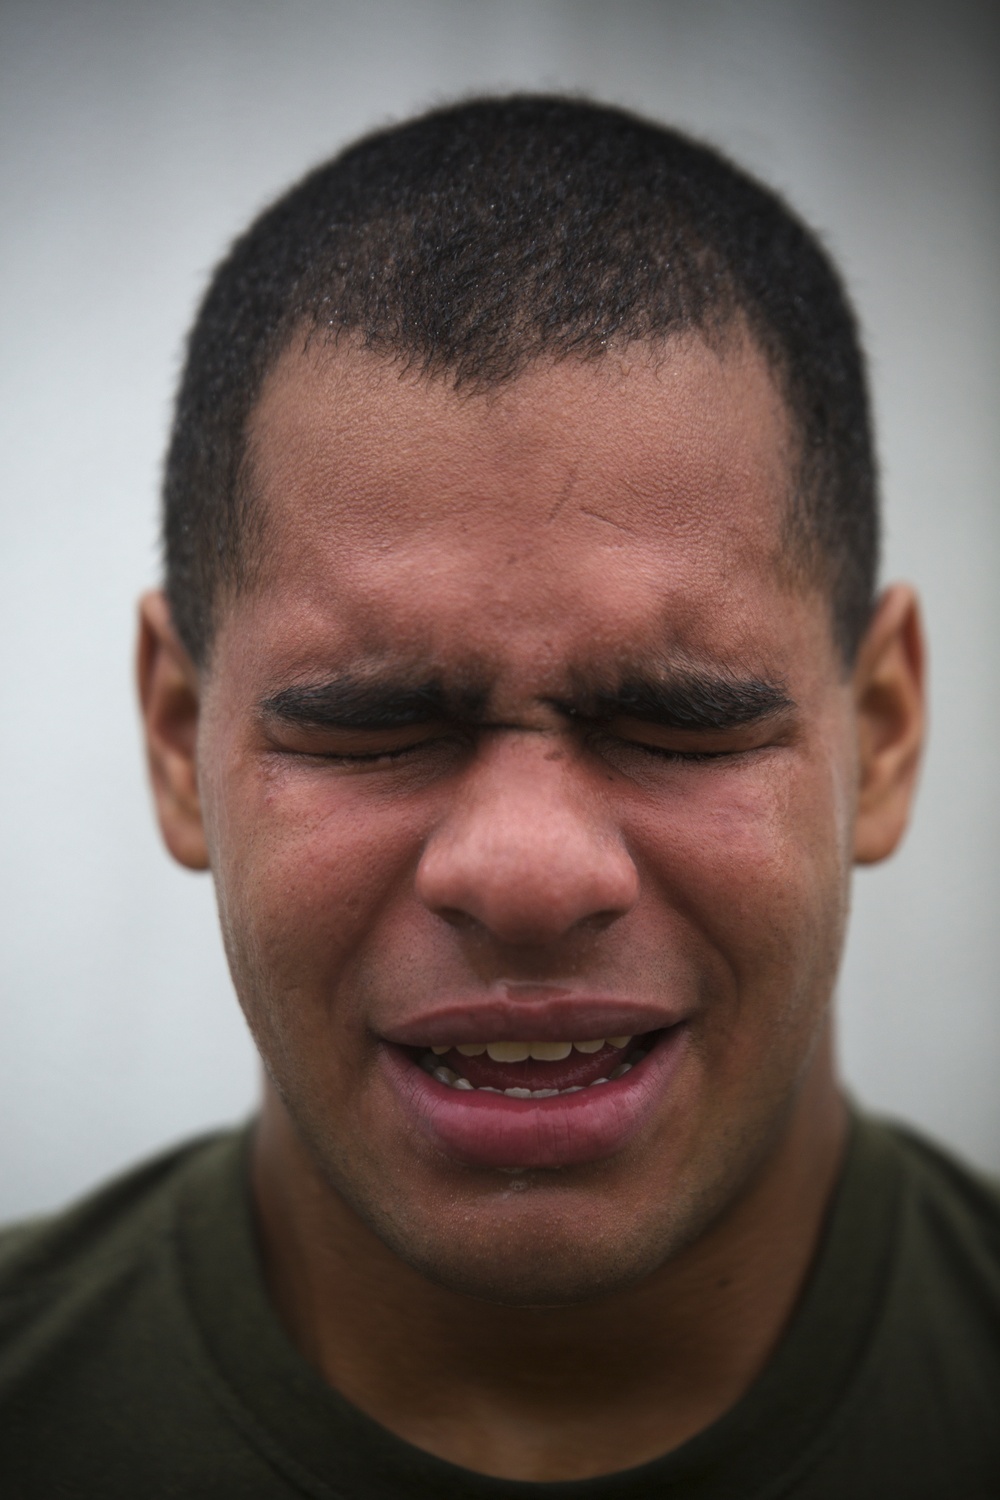 The pain is brutal for these Marines